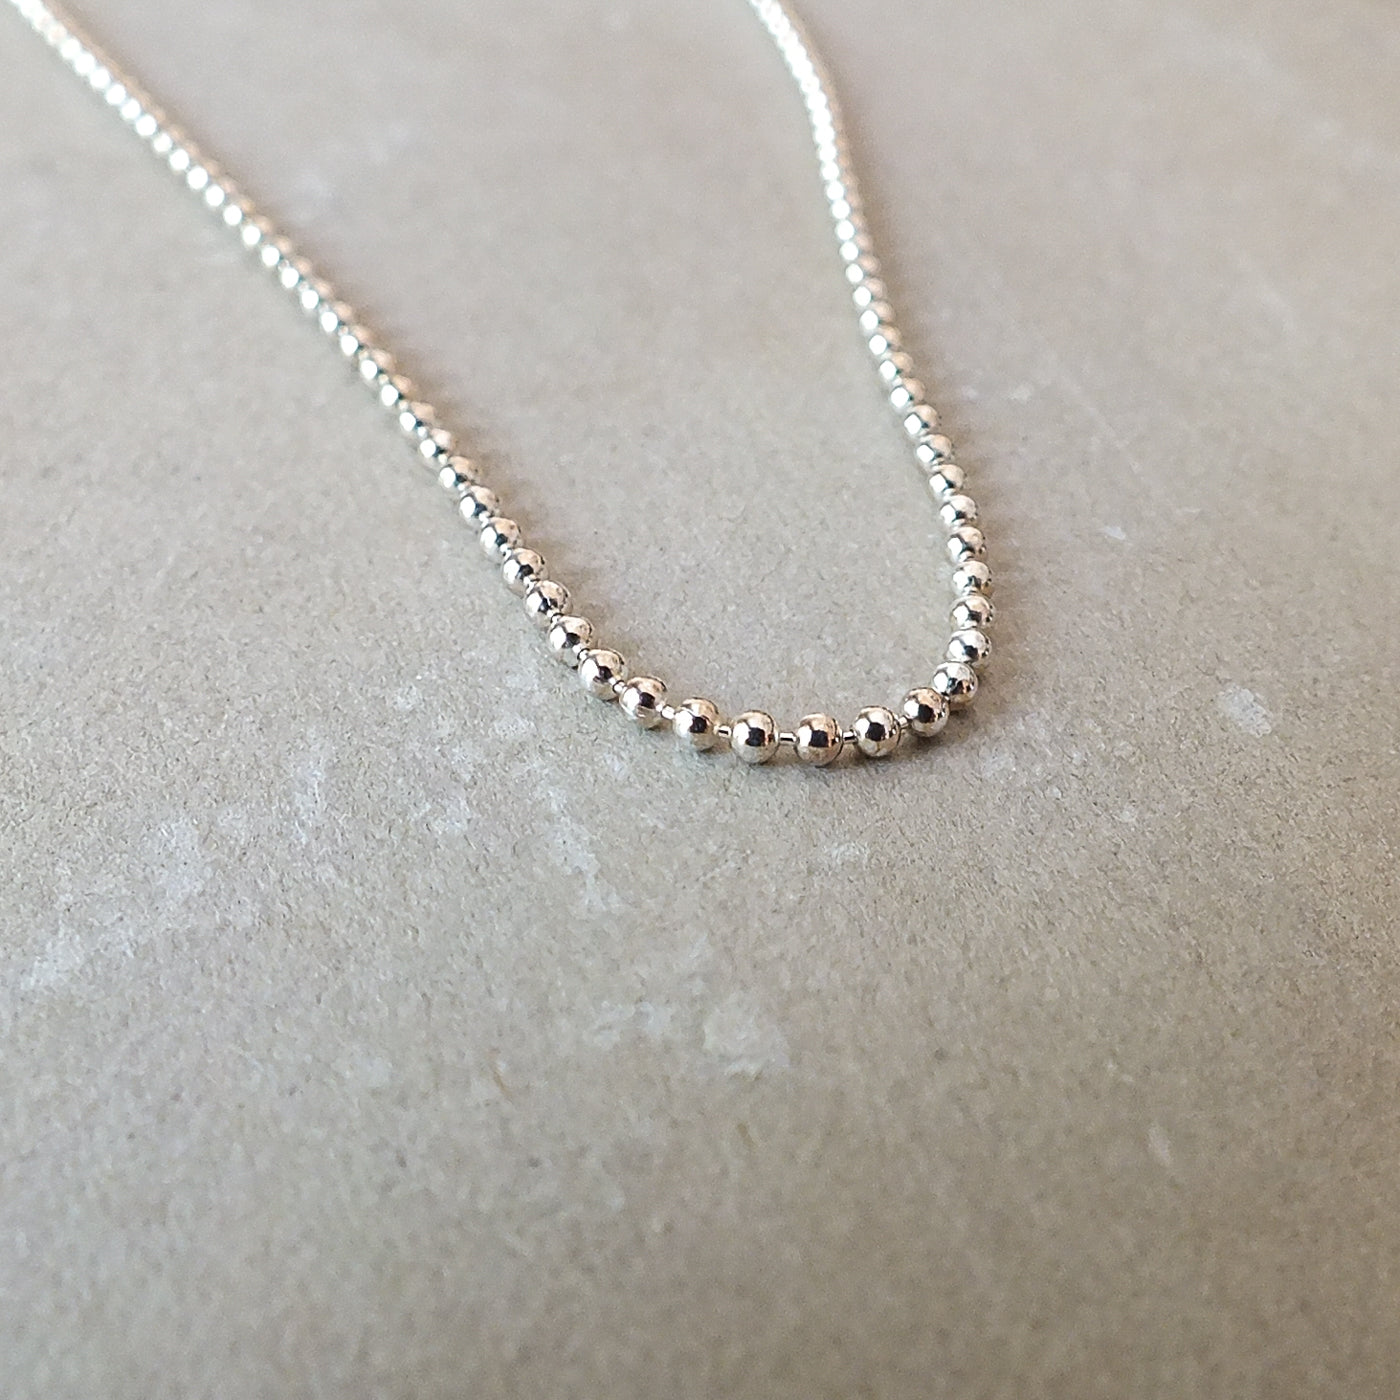 Becoming Jewelry's Sterling Silver Bead Chain Necklace on a light gray surface.